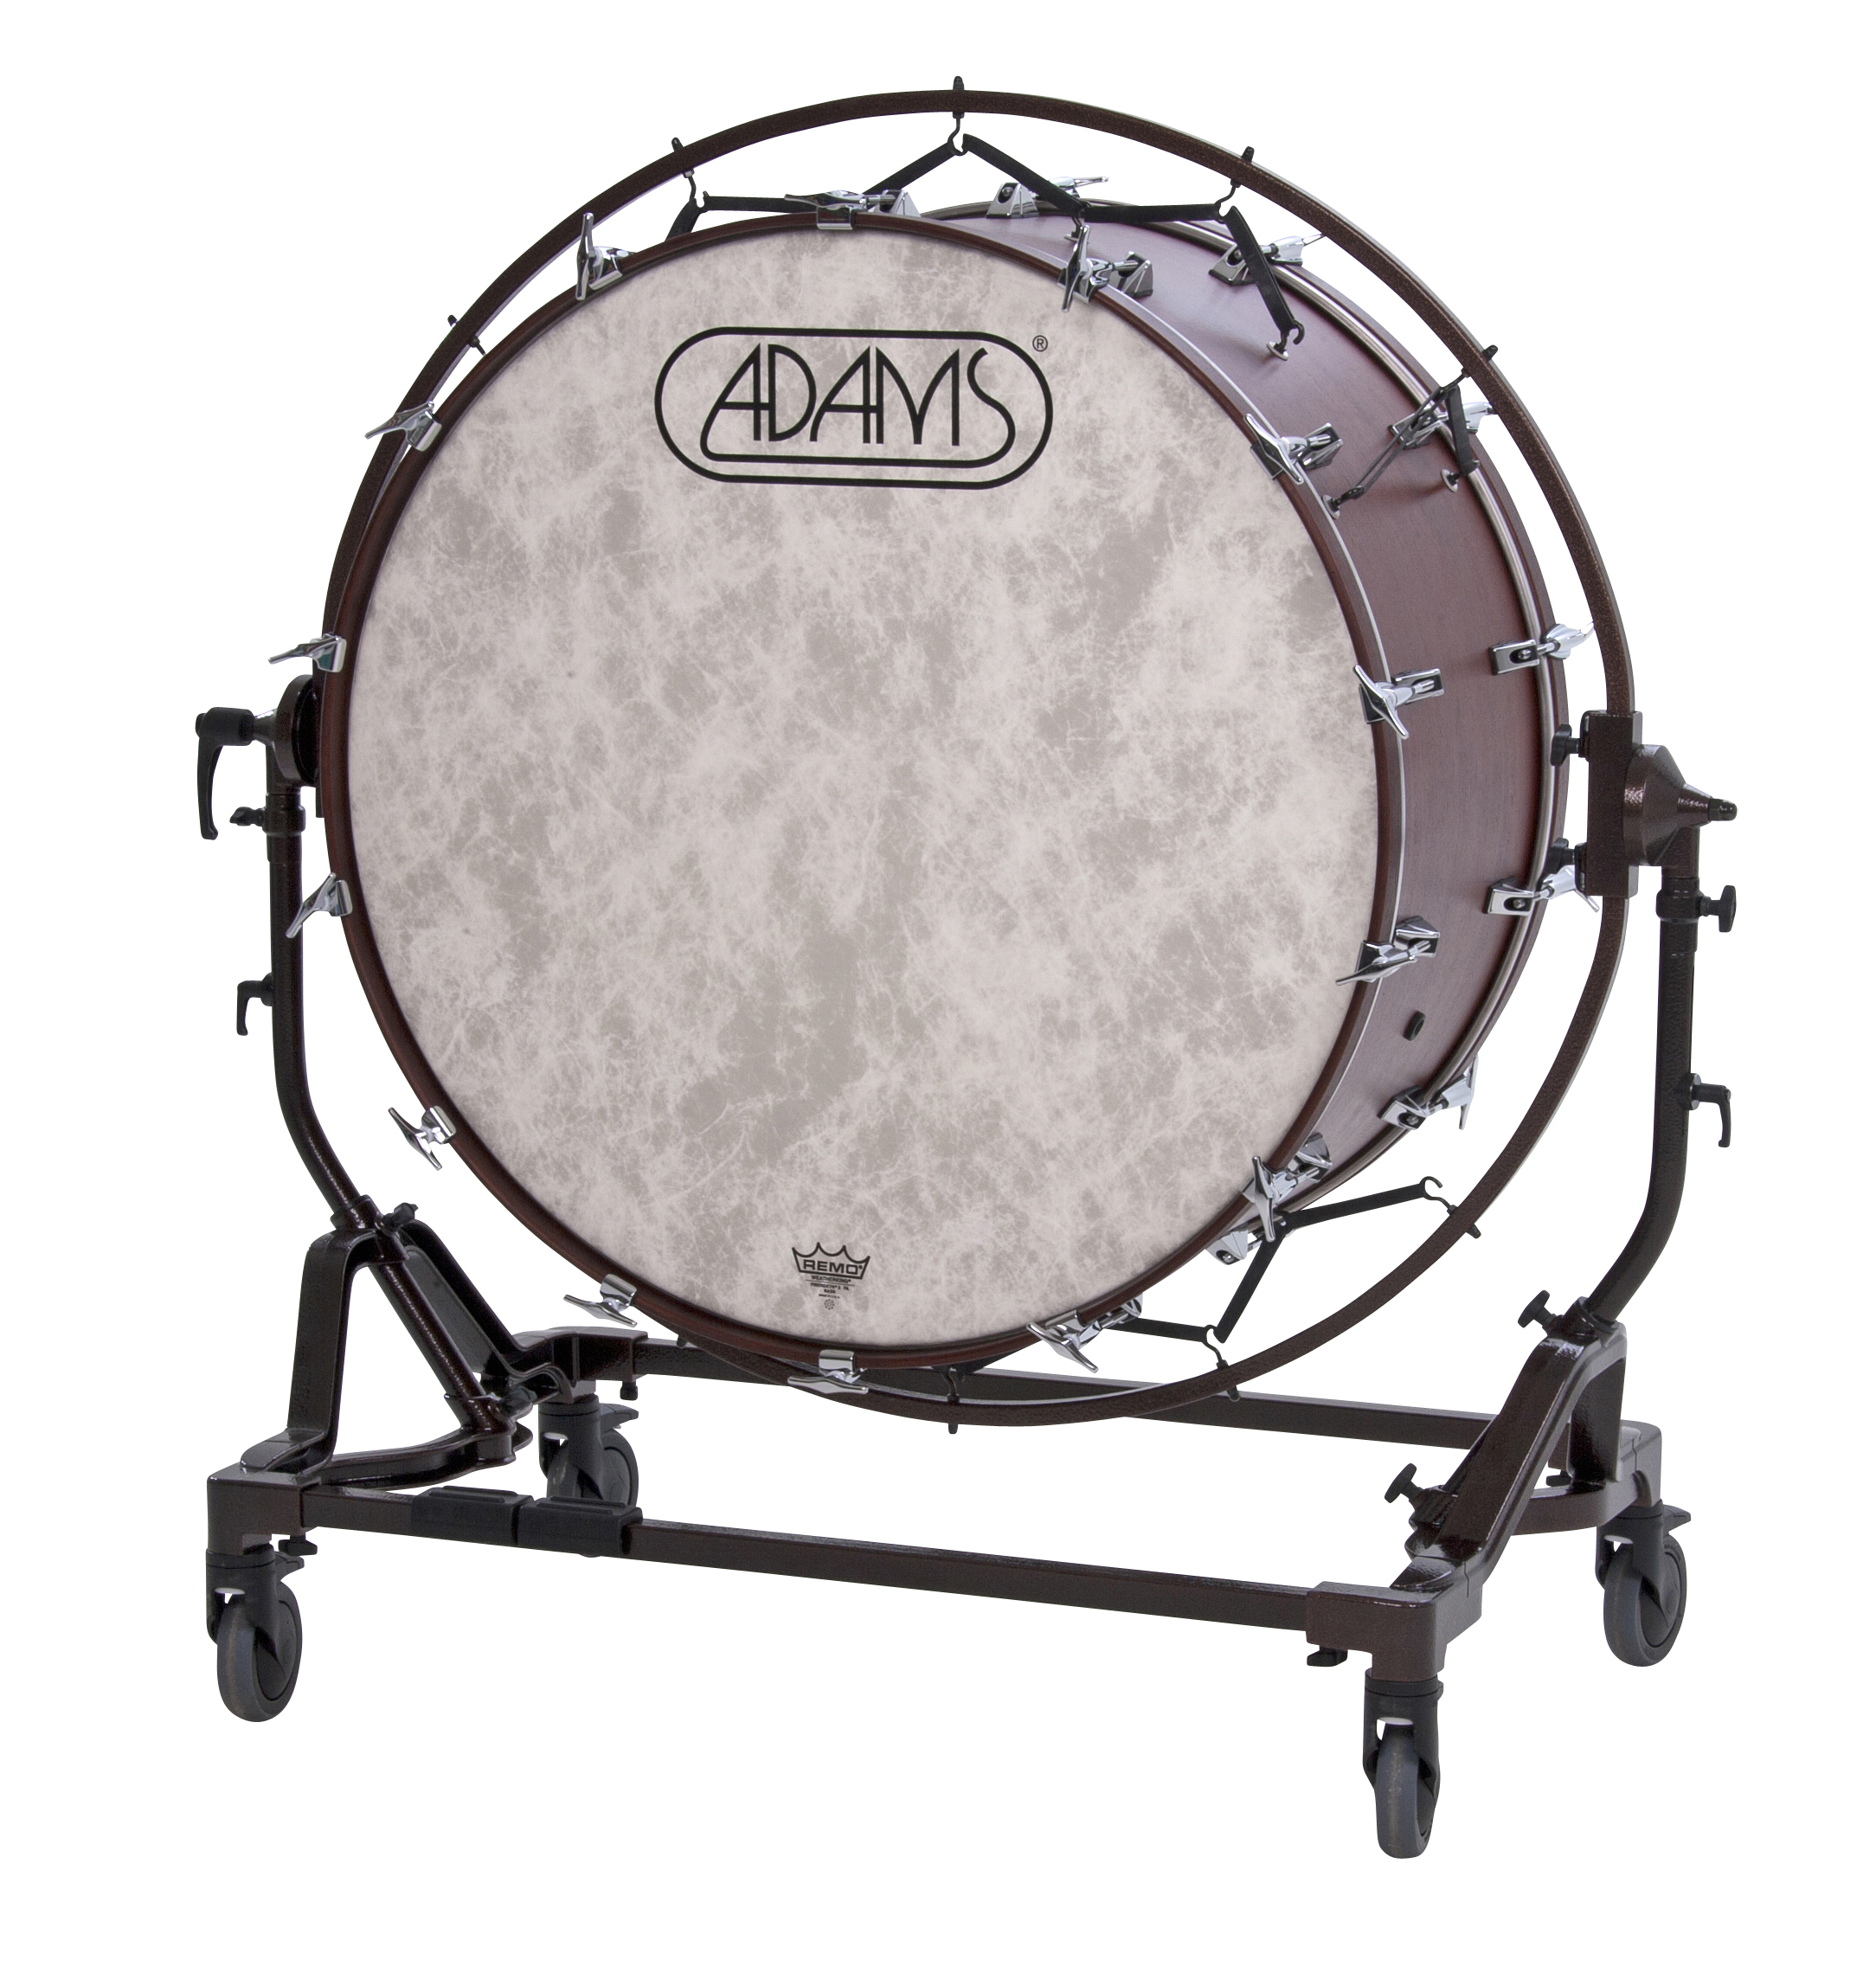 Free Suspended Bass Drum 36” x 22”